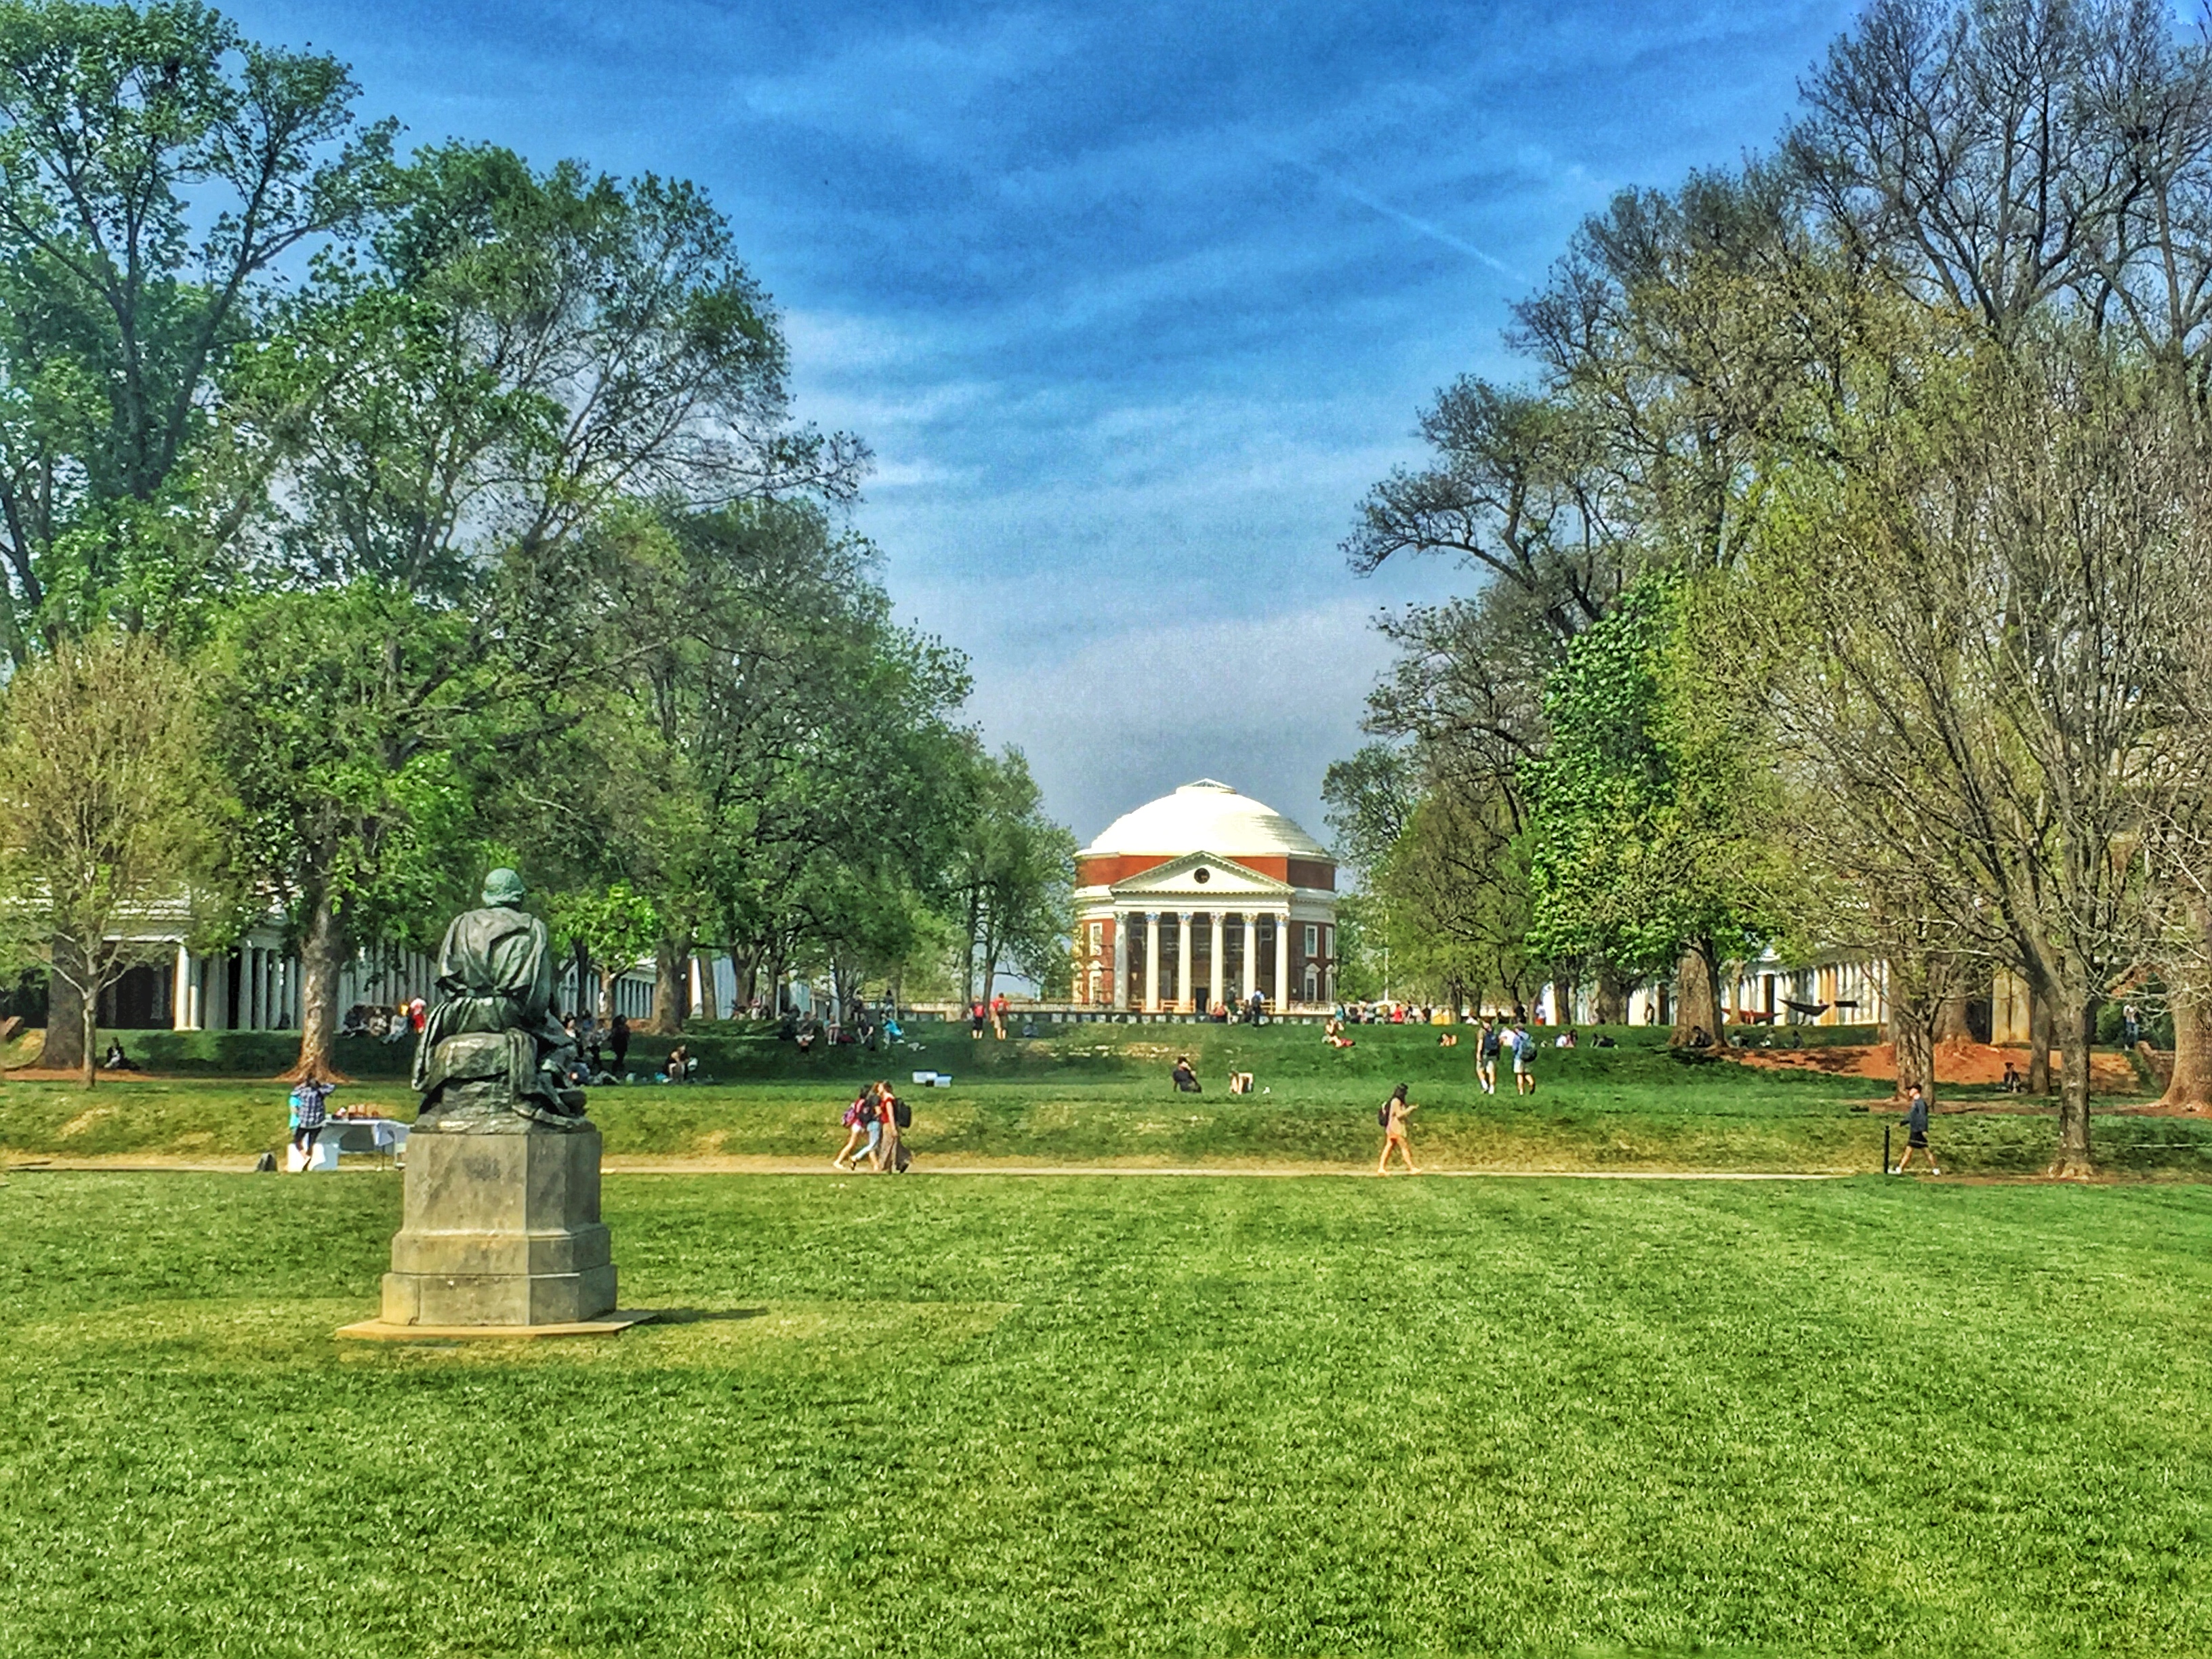 The Rotunda in the distance as students walk on the lawns sidewalks to and from classes